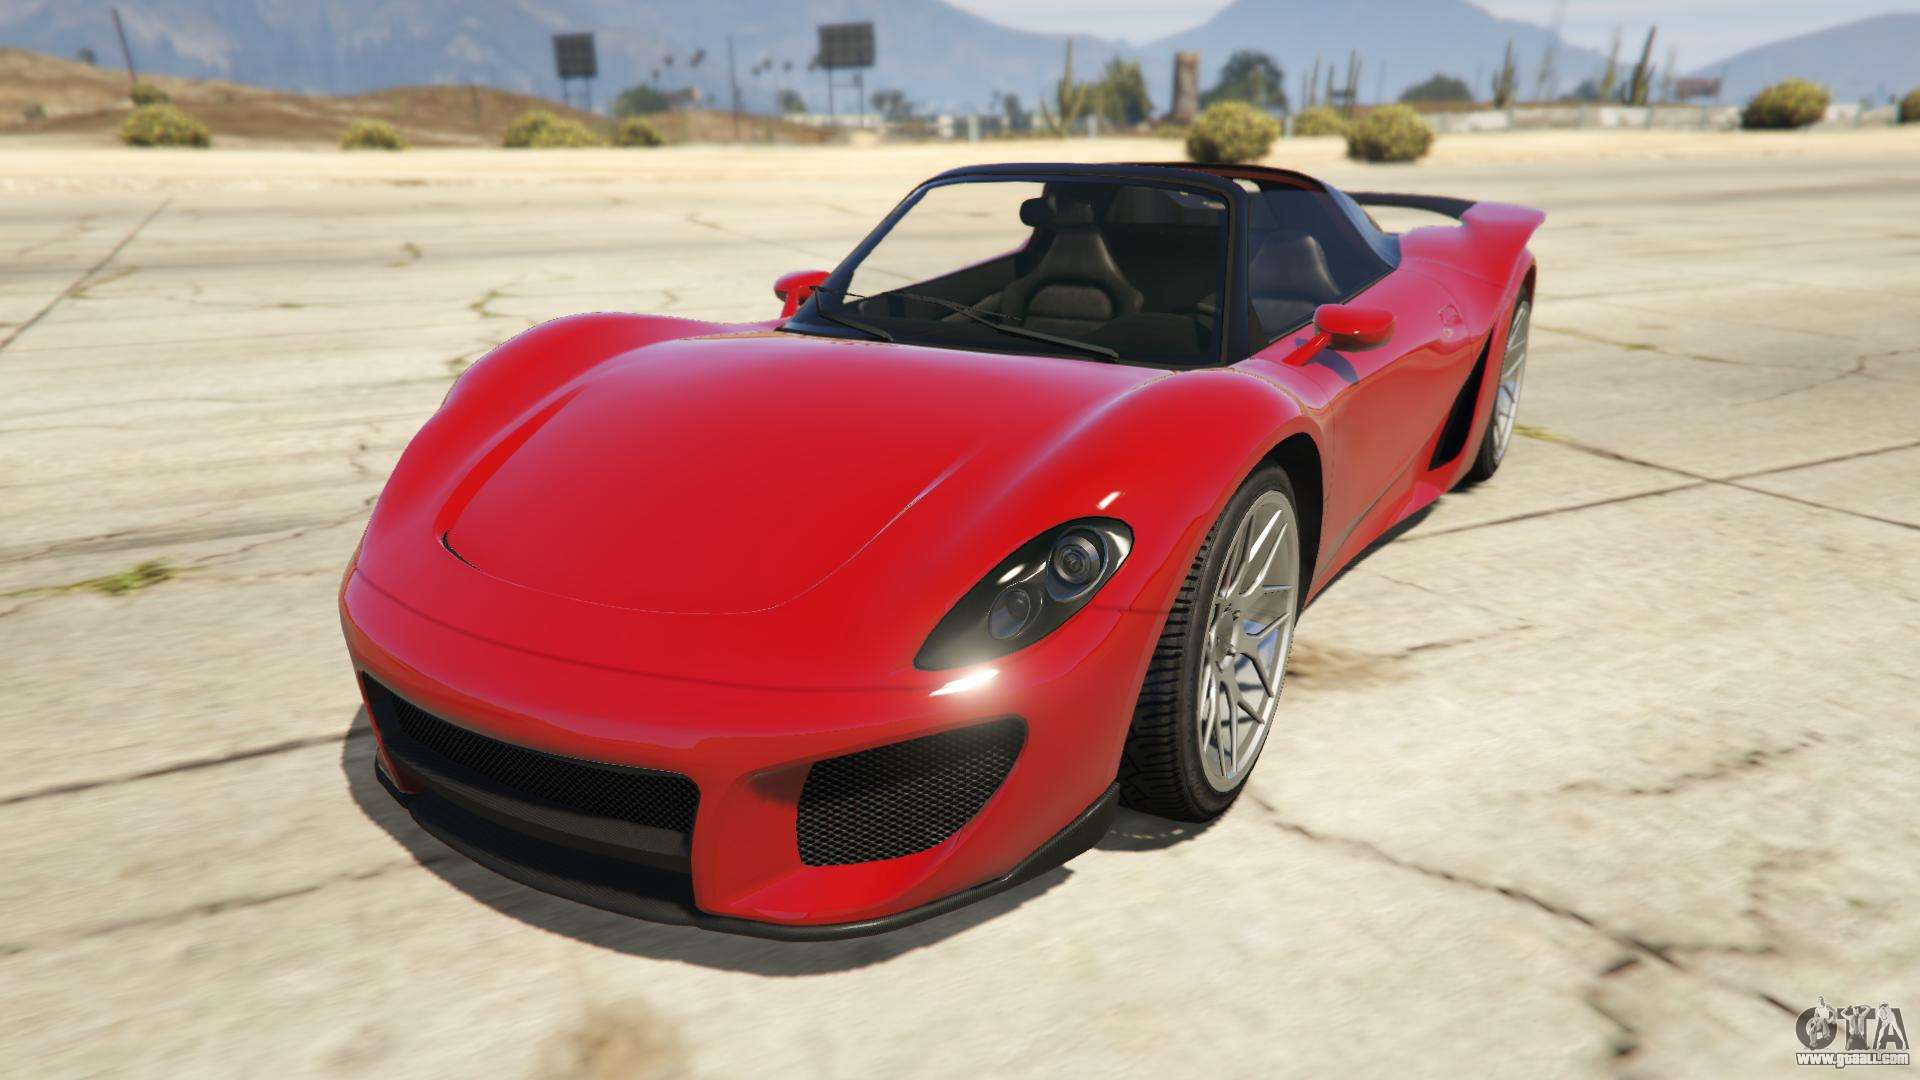 Pfister 811 From Gta 5 Screenshots Features And The Description Of A